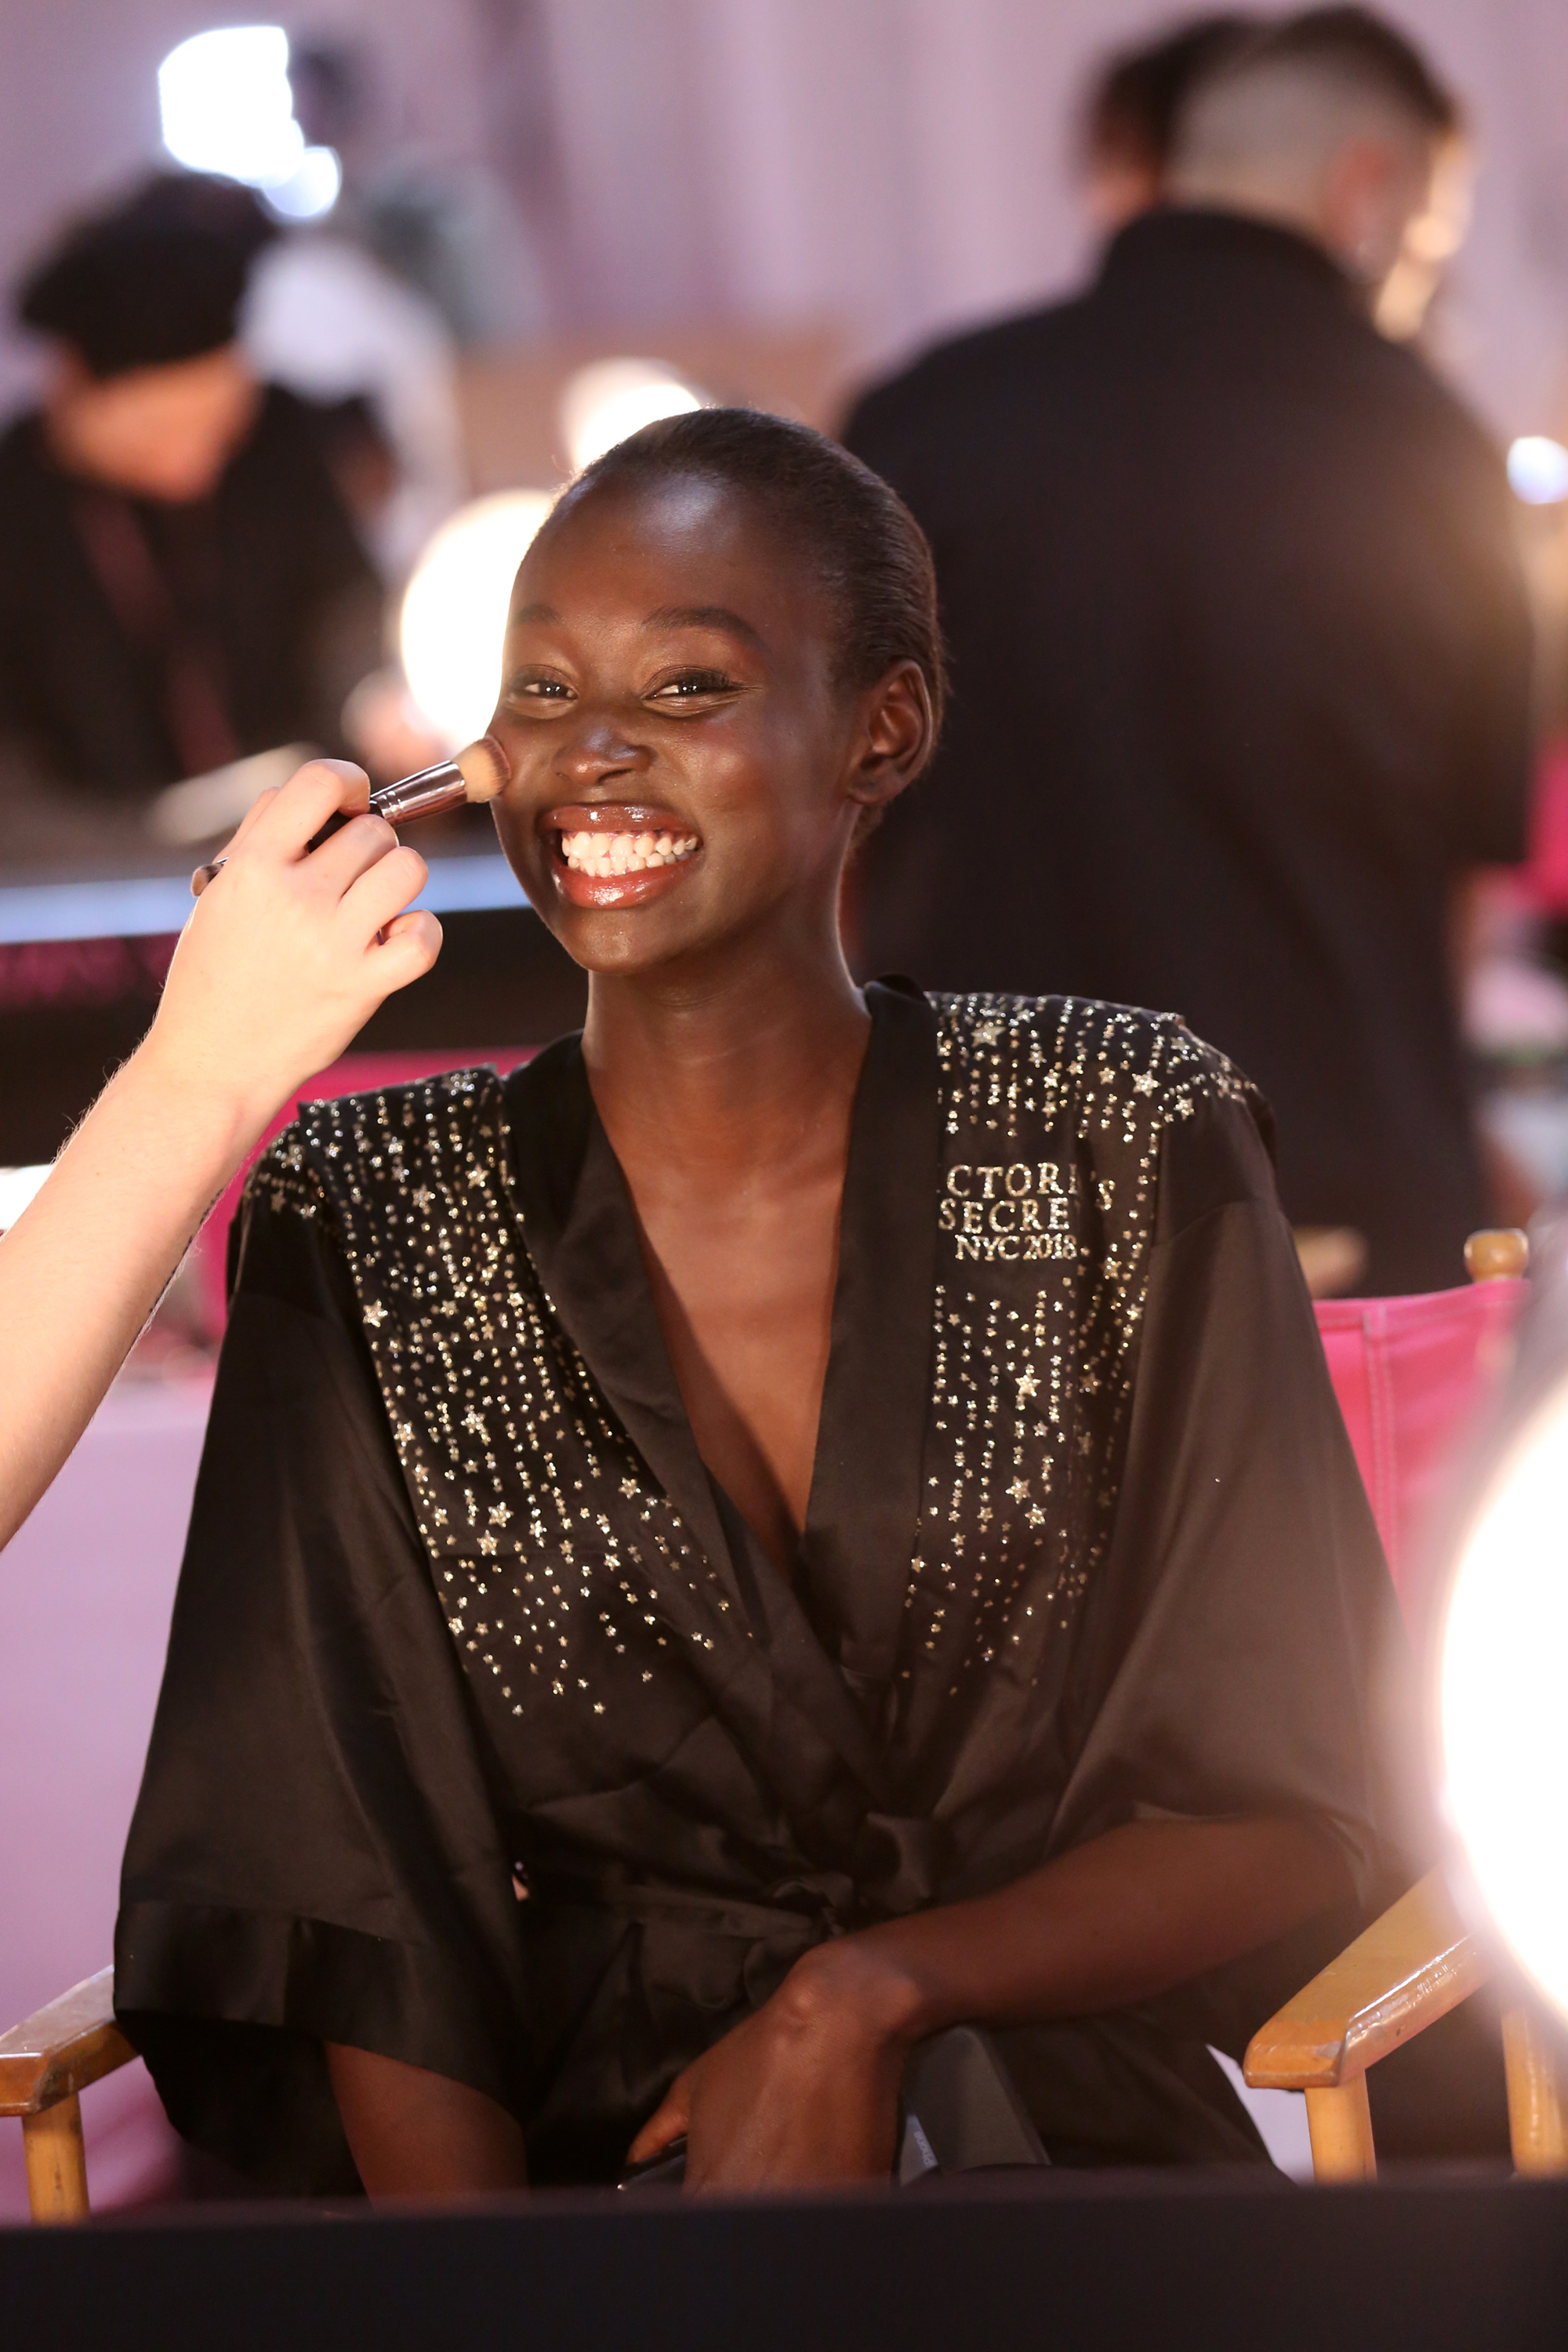 Get The Look: Behind-The-Scenes Victoria’s Secret Fashion Show